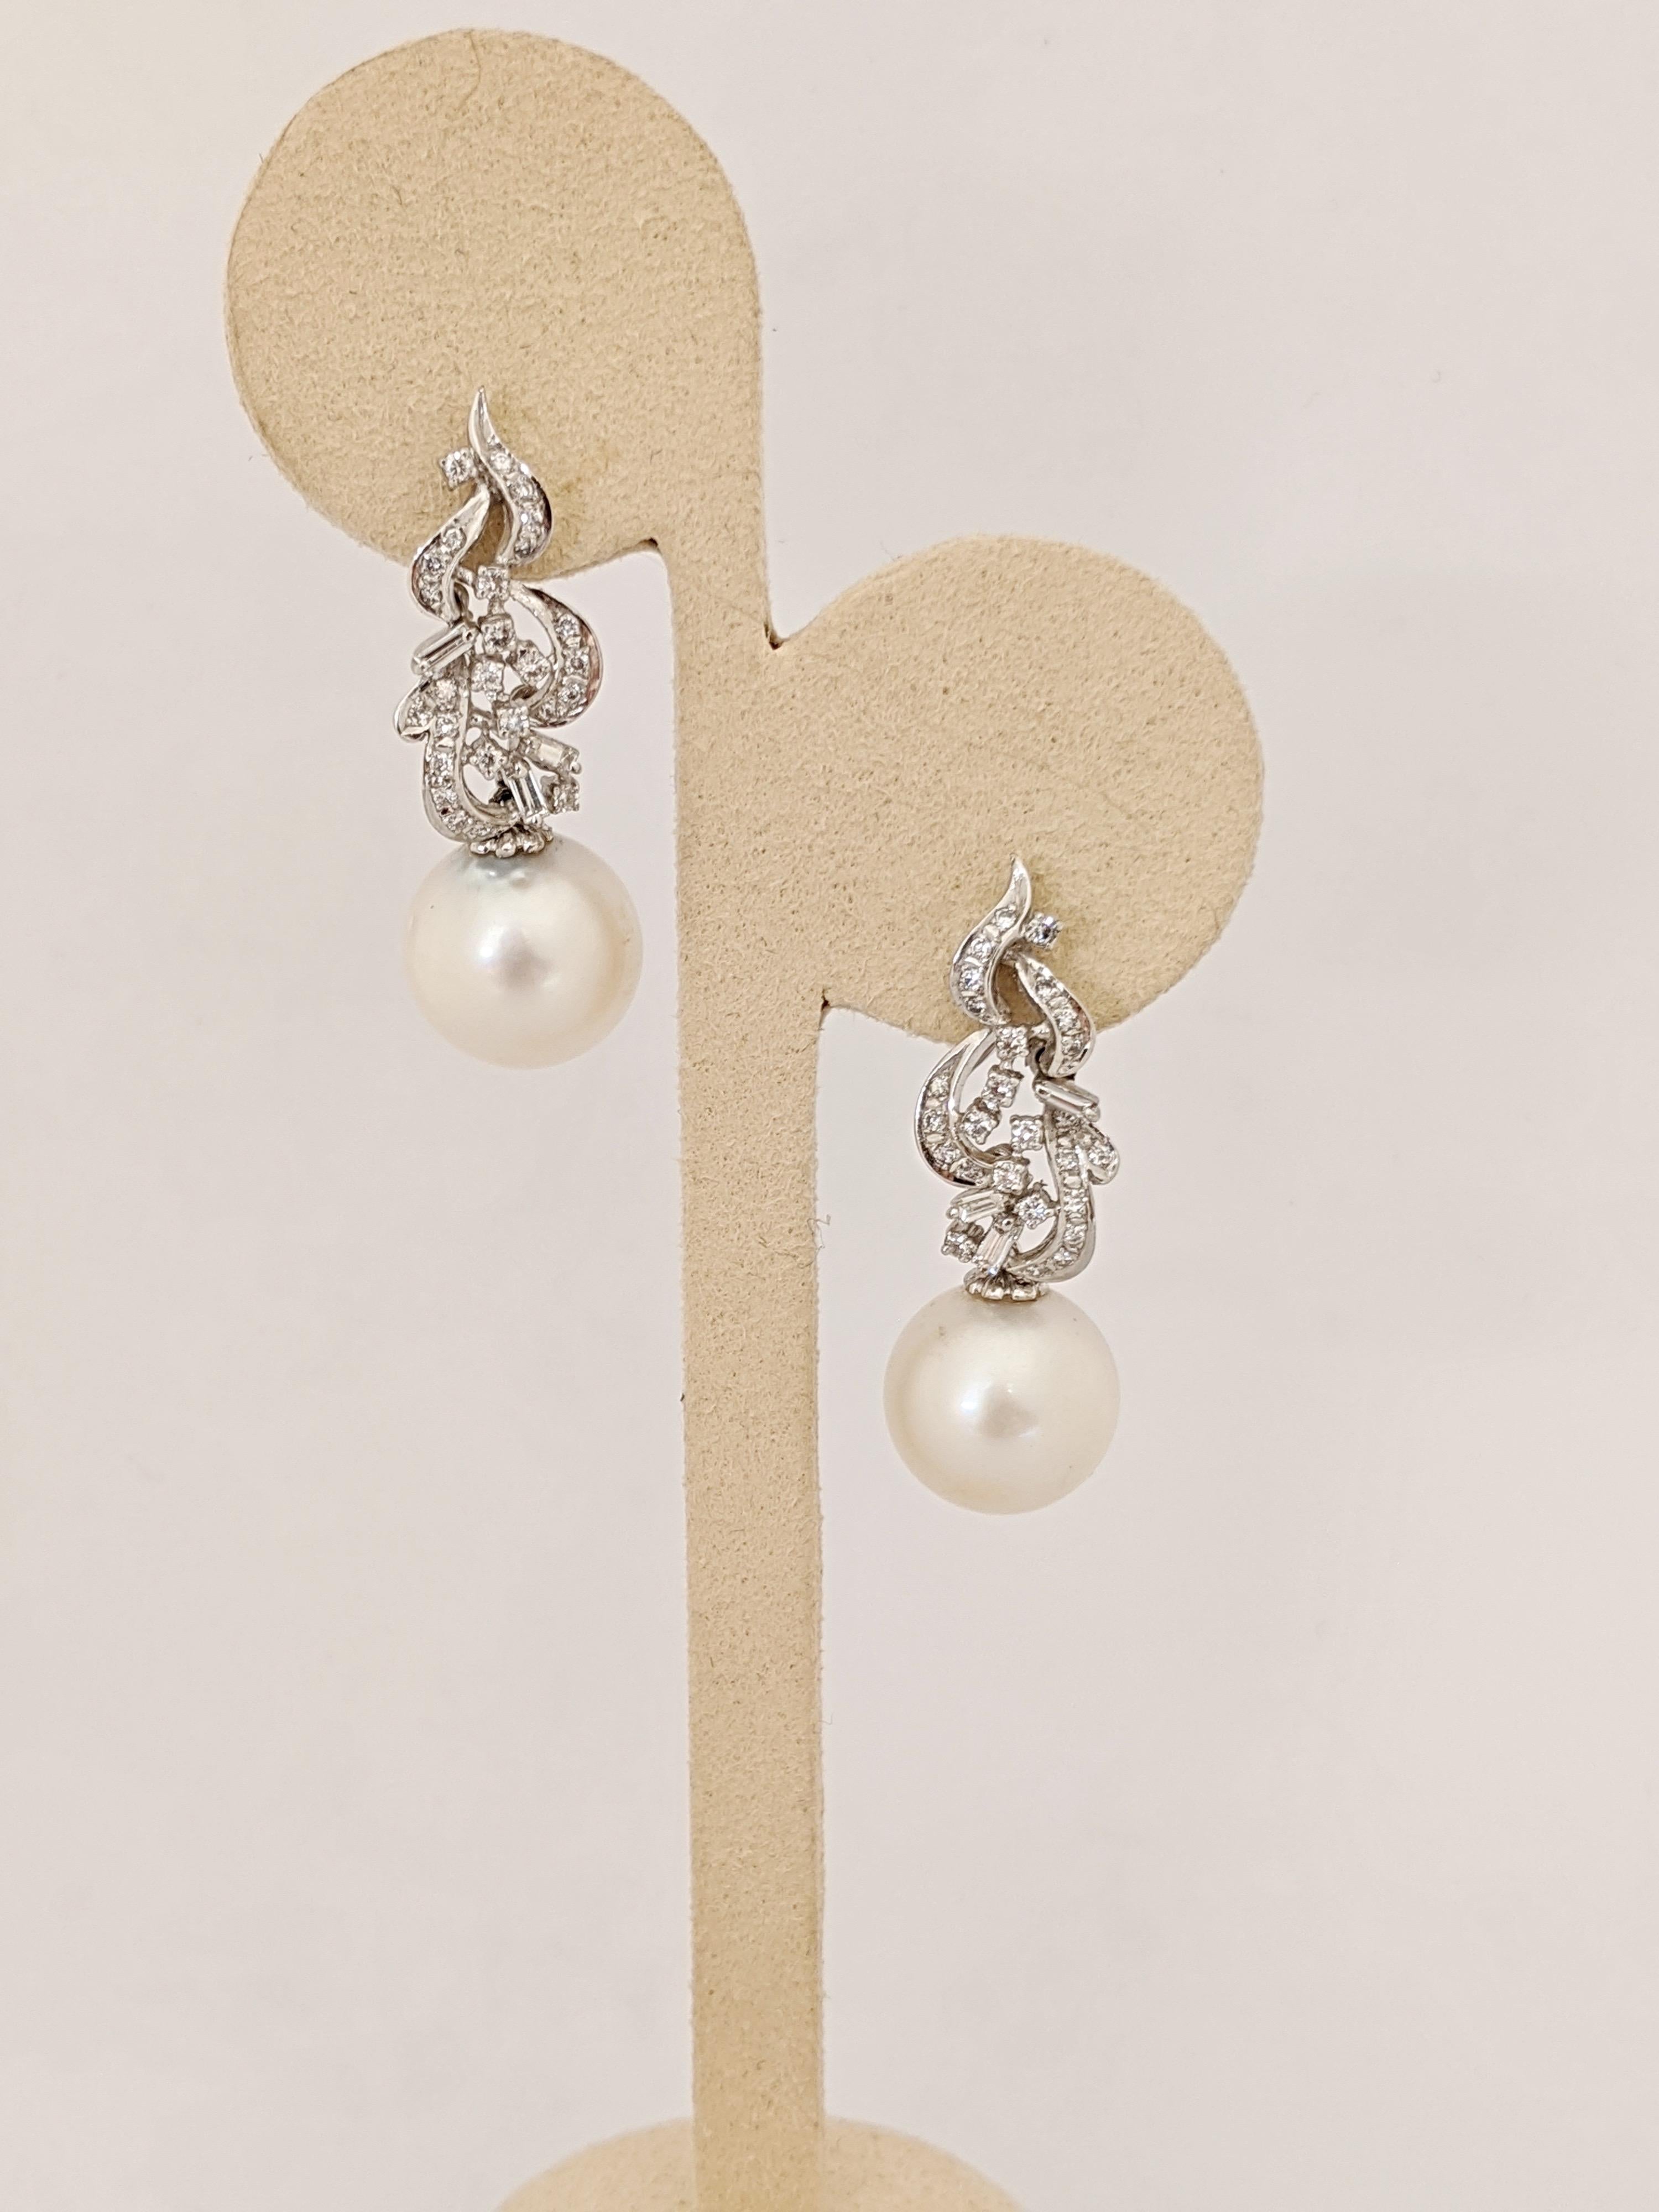 A pair of 18 karat white gold and Diamond hanging earrings with a South Sea Pearl drop. The top part of the earrings are designed with a swirly shape set with round brilliant and baguette cut Diamonds. South Sea Pearls 13.3mm x 13.2 mm hang below